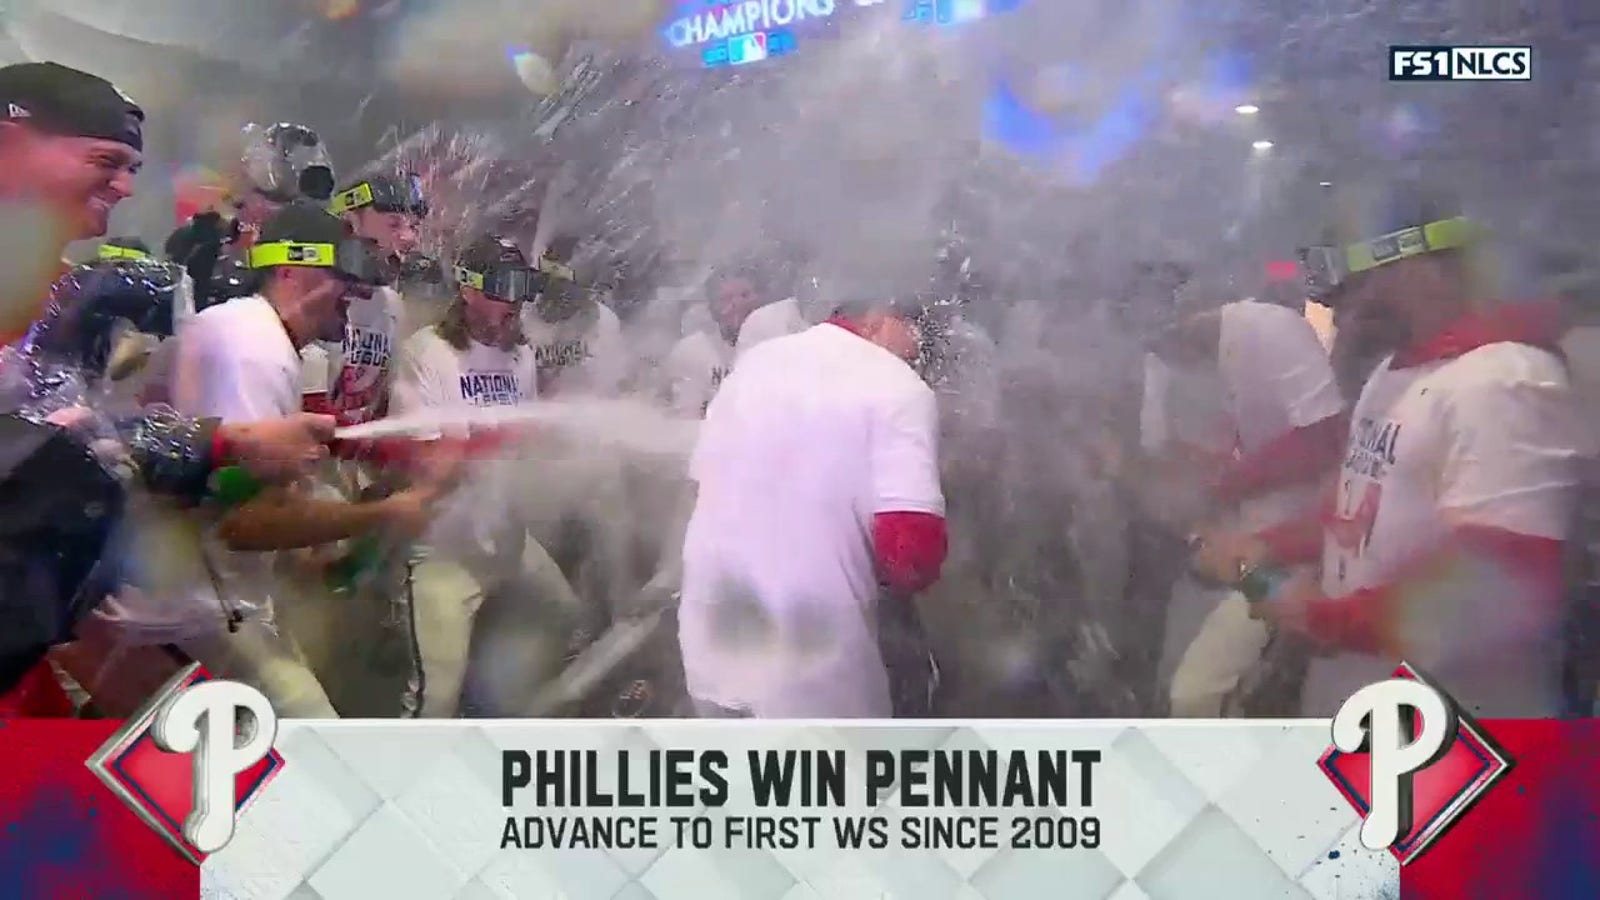 The Phillies pop champagne and celebrate heading to the World Series